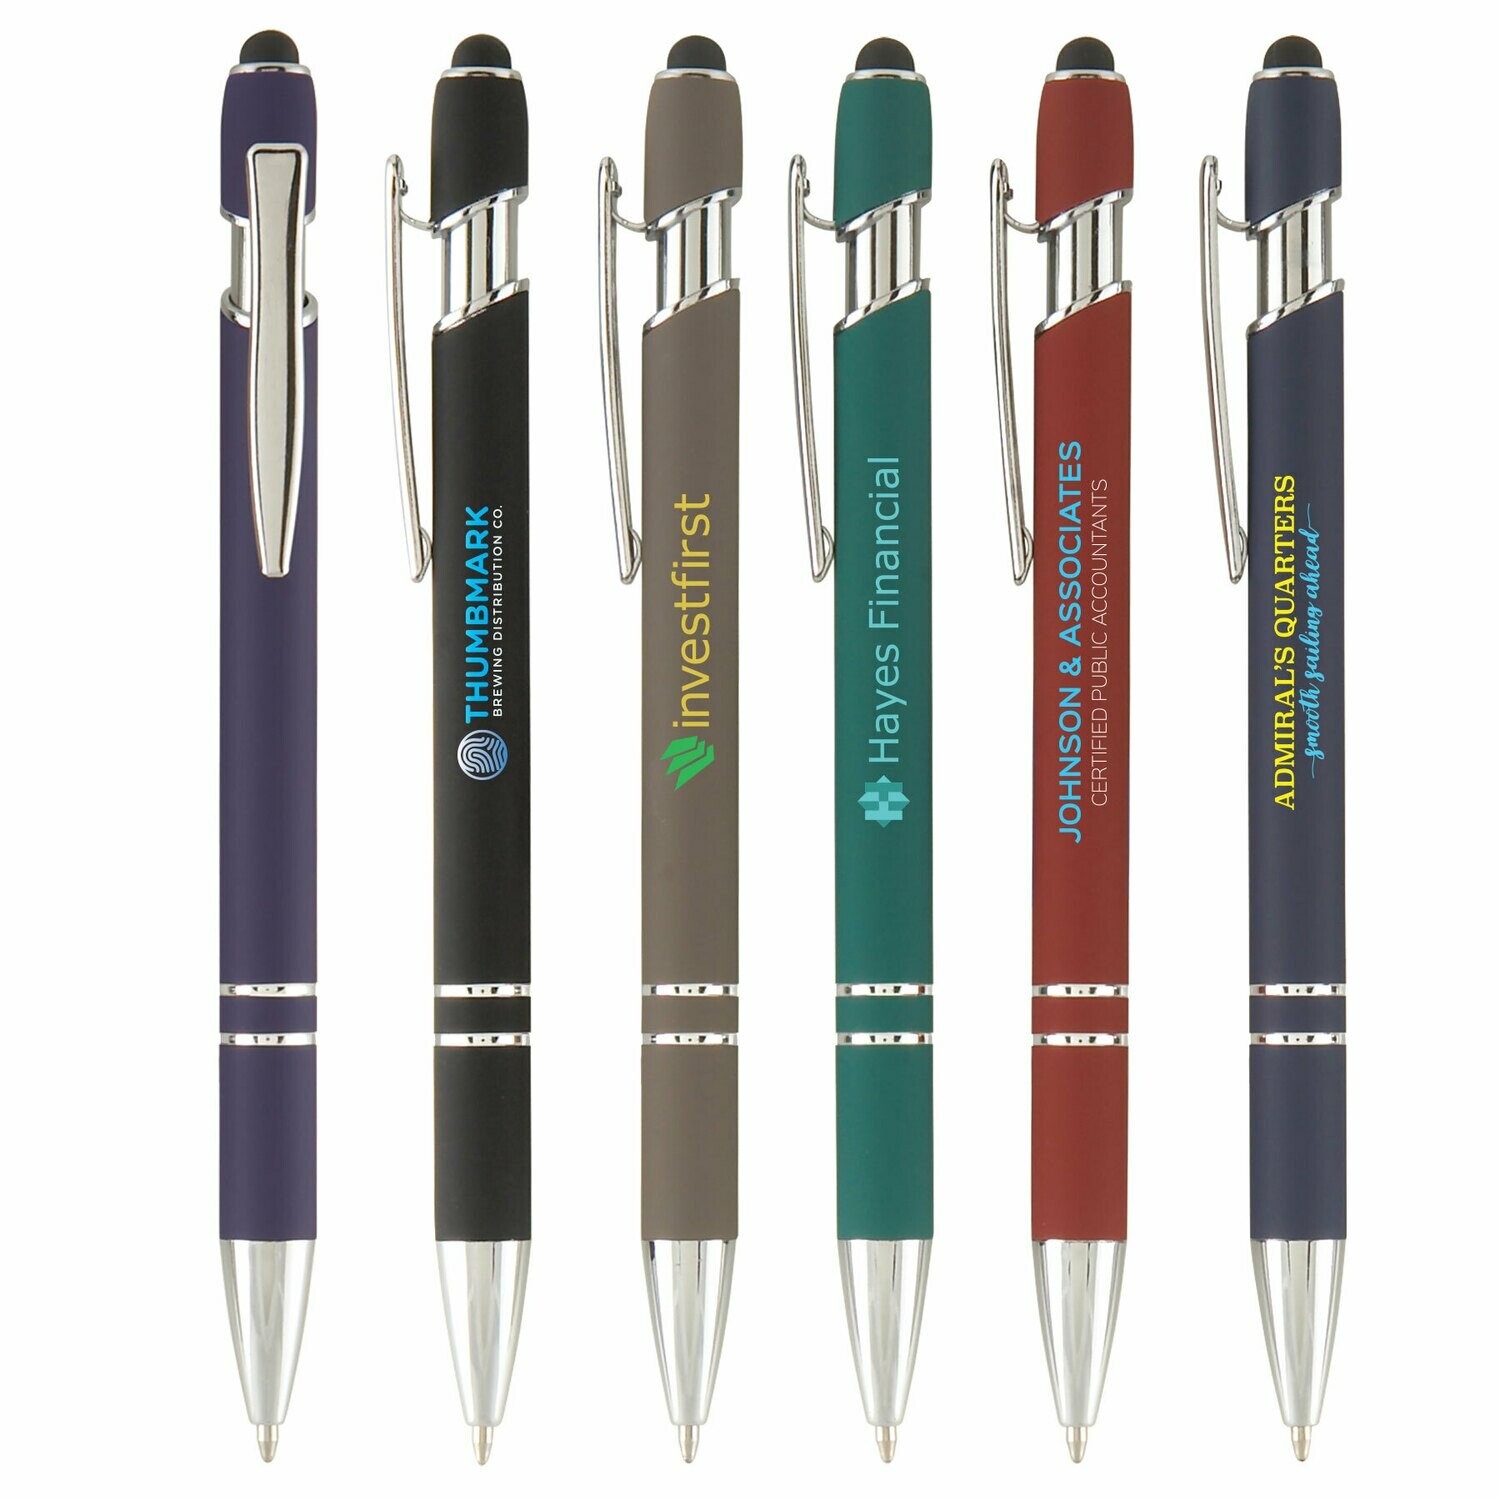 Ellipse Softy With Stylus - ColorJet